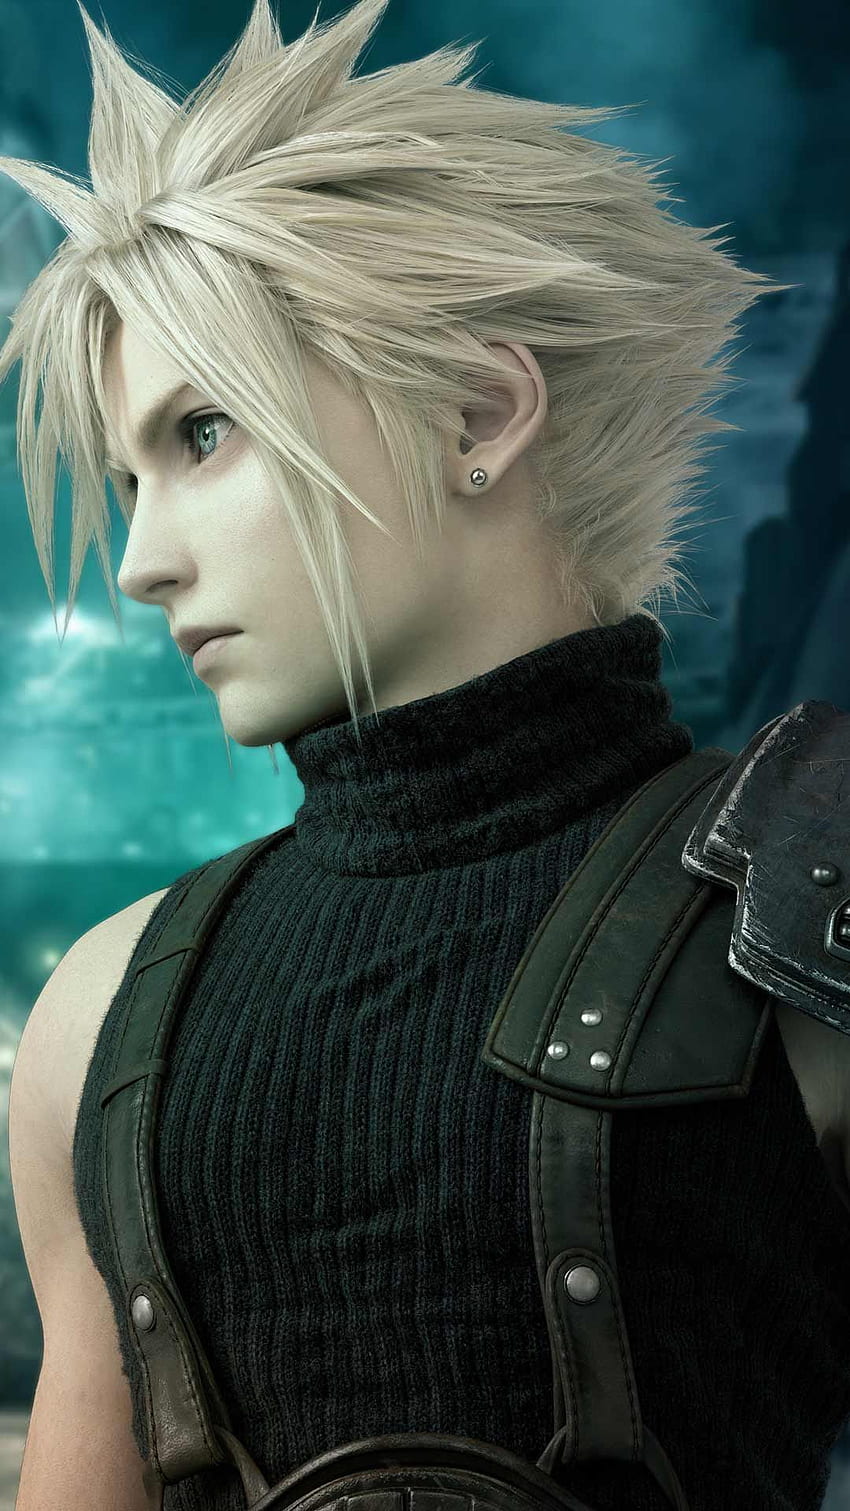 Final Fantasy 7 Remake phone background PS4 game art poster logo on iPhone andro in 2020. Final fantasy cloud strife, Final fantasy vii cloud, Final fantasy, Cloud FF7 Remake Tapeta na telefon HD